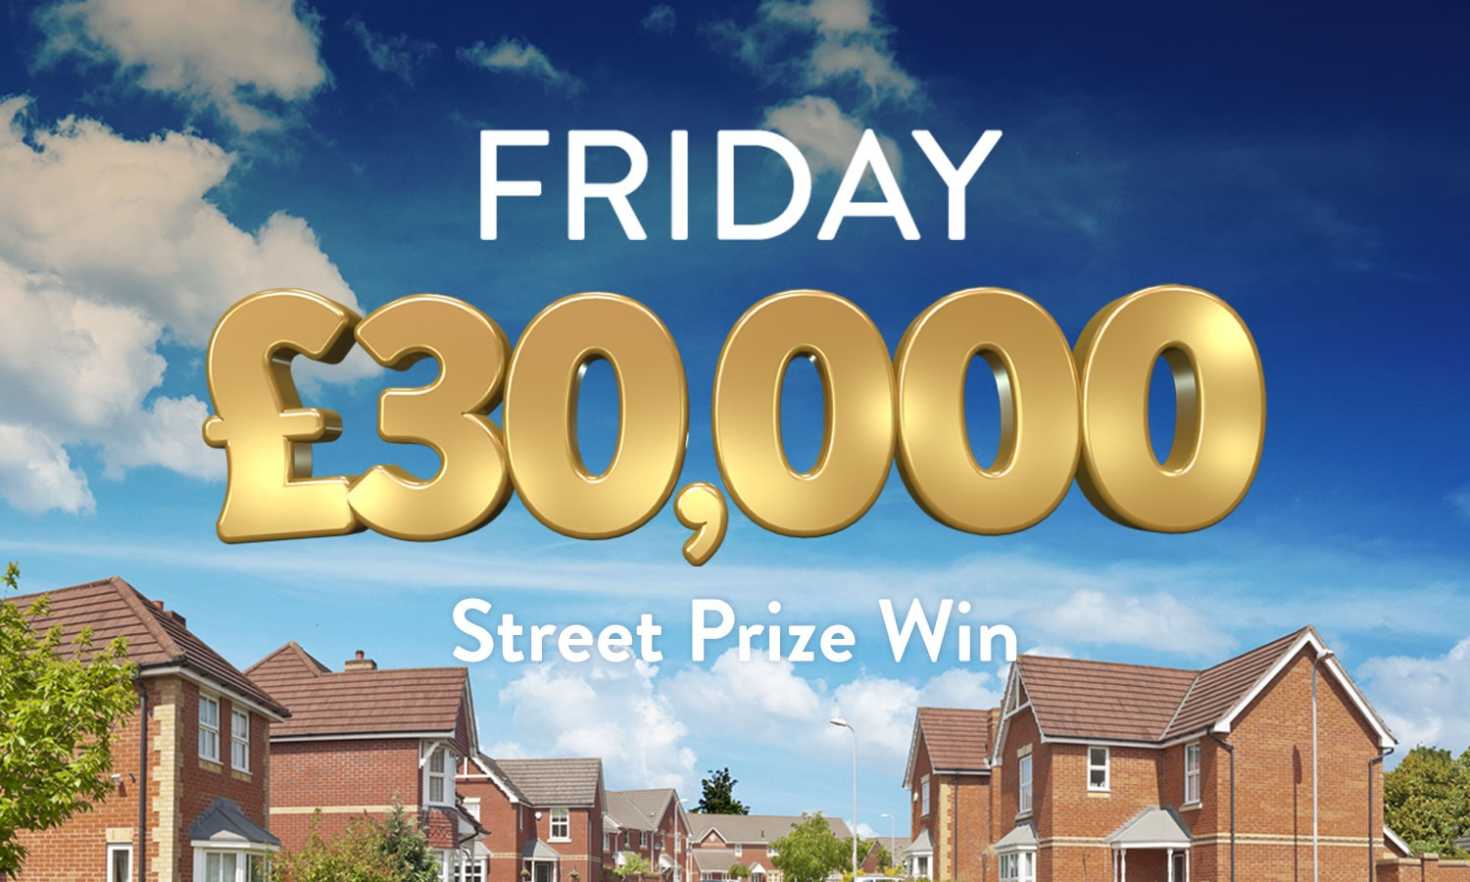 Every lucky ticket wins £30,000 in today's Street Prize